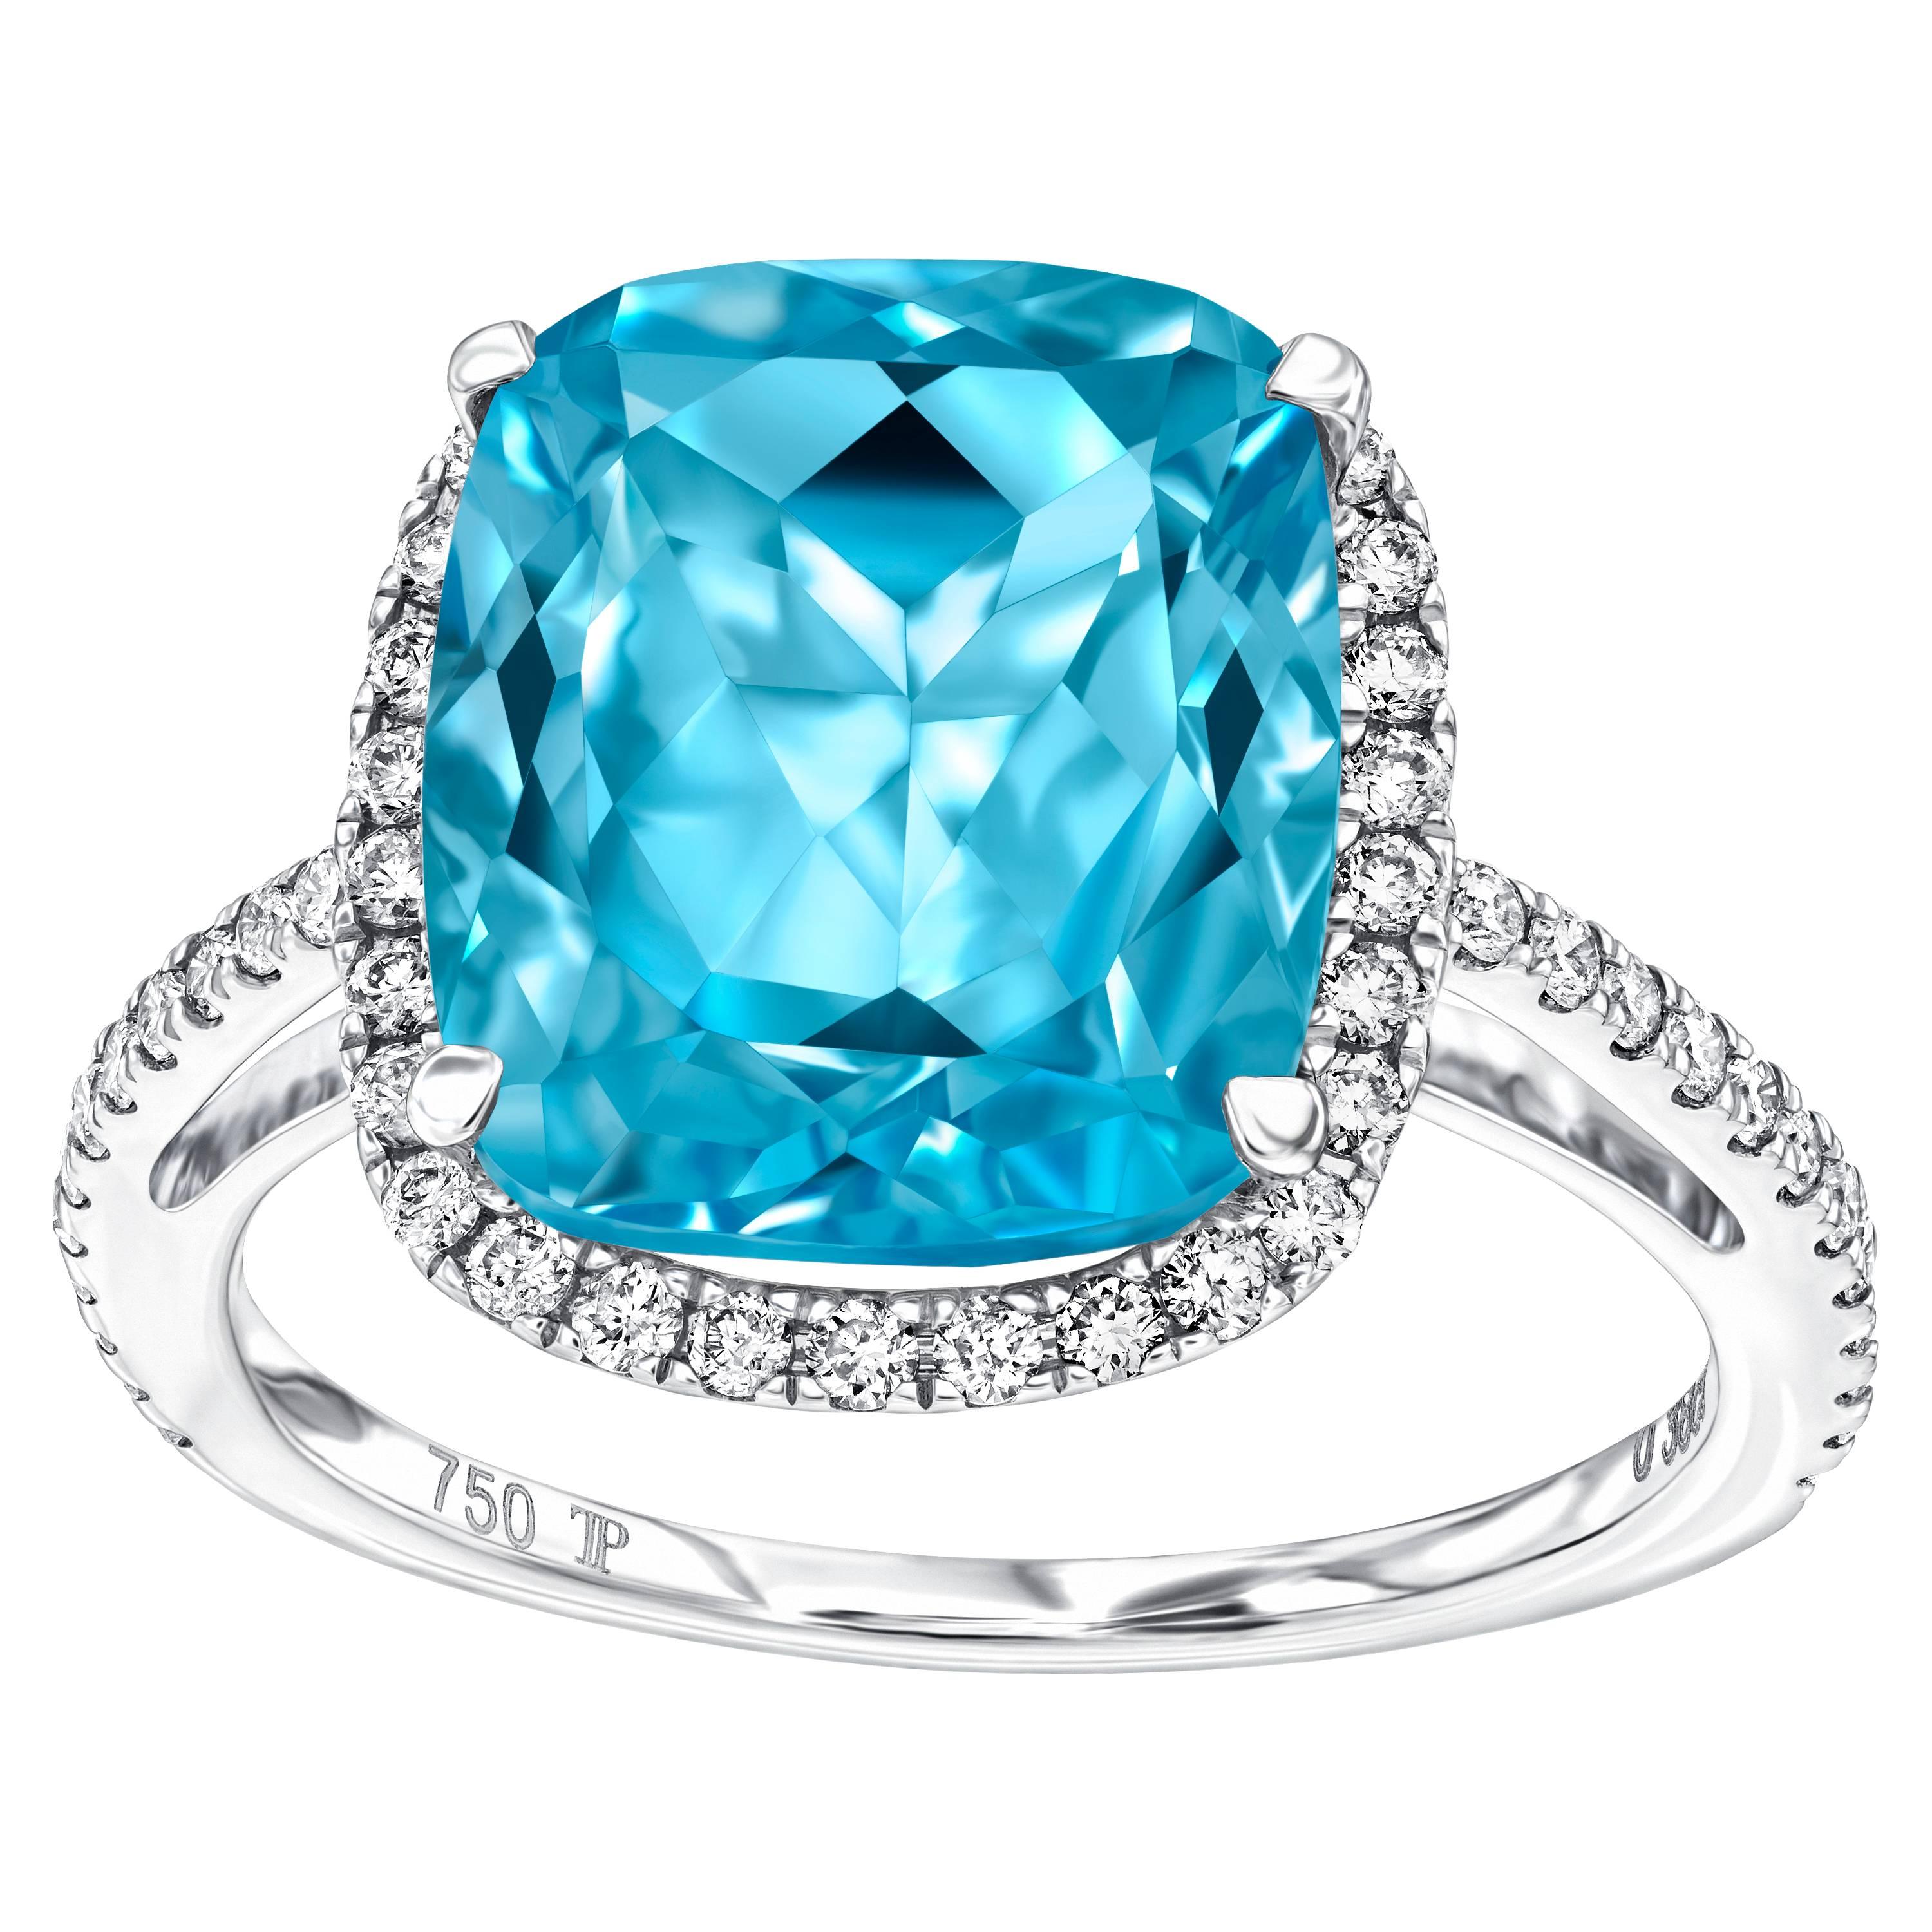 This Outstanding 6- 6.50 carat Cushion Cut Blue Topaz Engagement Ring surrounded by a pave set halo featuring 0.38ct Round Brilliant Diamonds. 
This ring has a total gem weight of 6.40 - 6.88 Carats, The diamonds are white eye clean quality grading